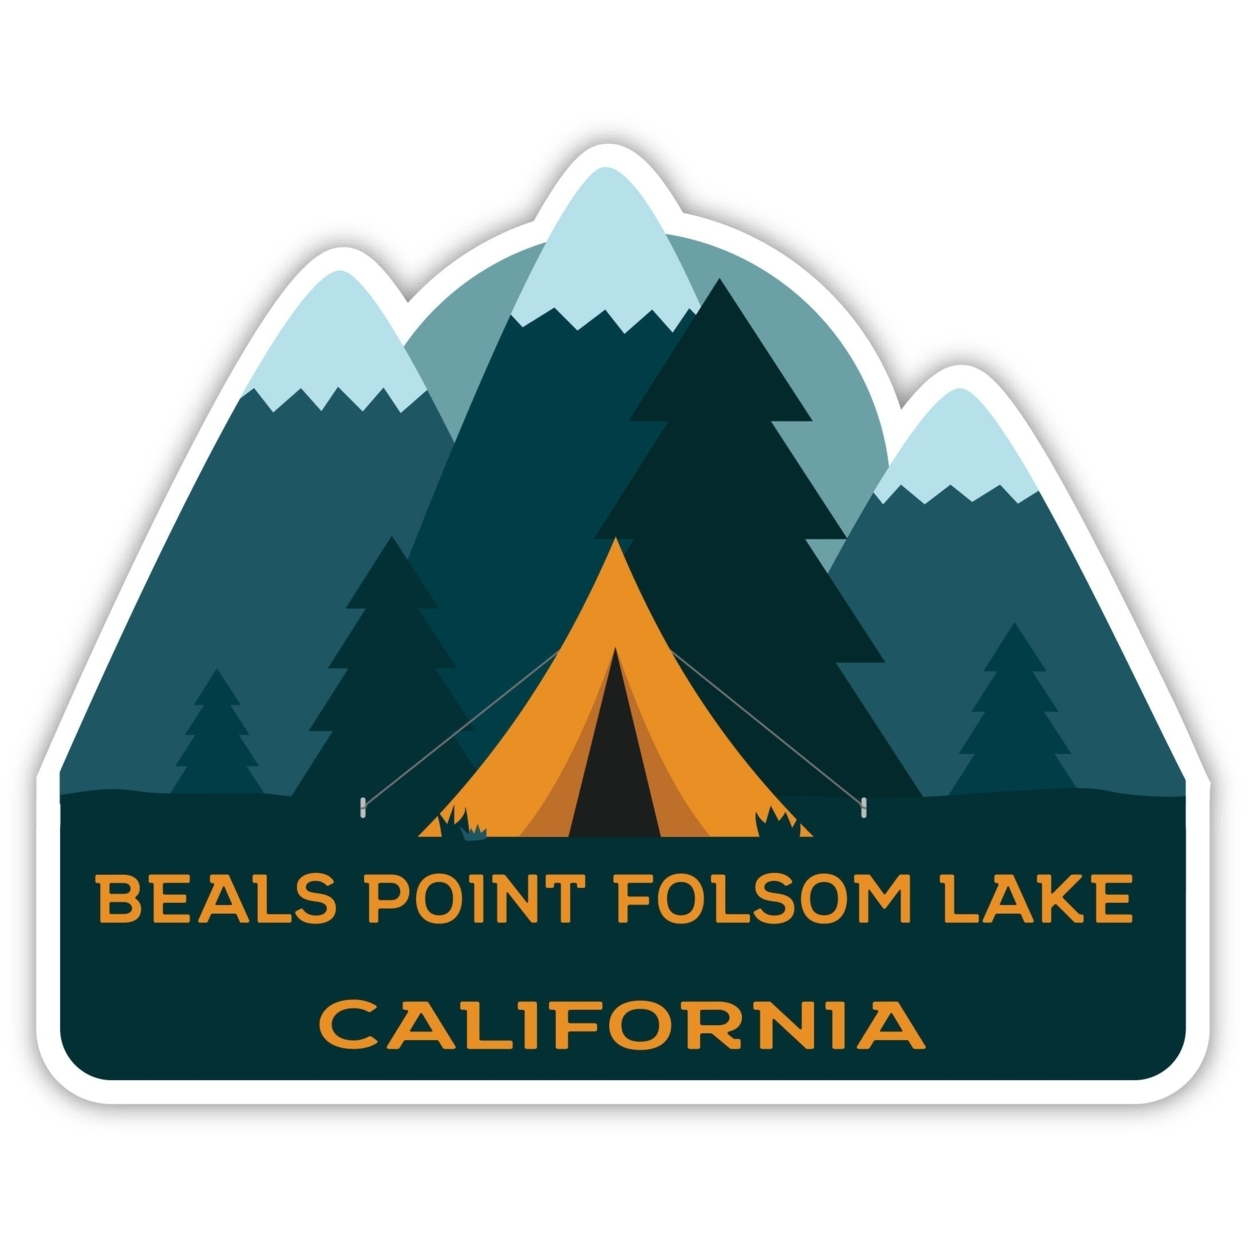 Beals Point Folsom Lake California Souvenir Decorative Stickers (Choose Theme And Size) - 4-Pack, 4-Inch, Tent